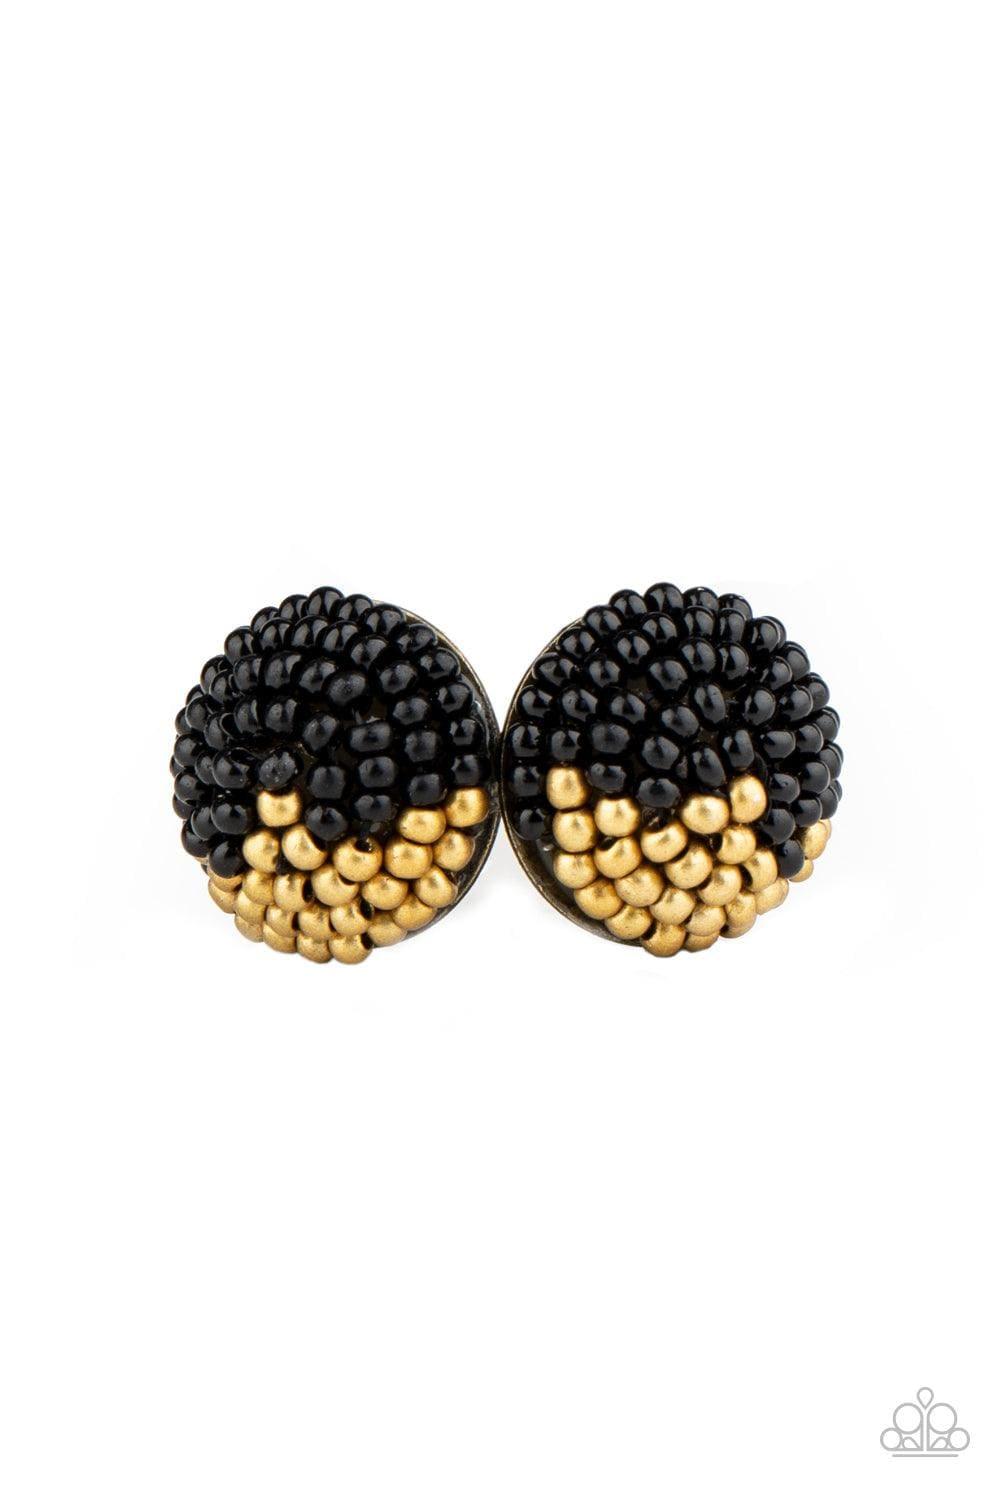 Paparazzi Accessories - As Happy As Can Bead - Black Earring - Bling by JessieK